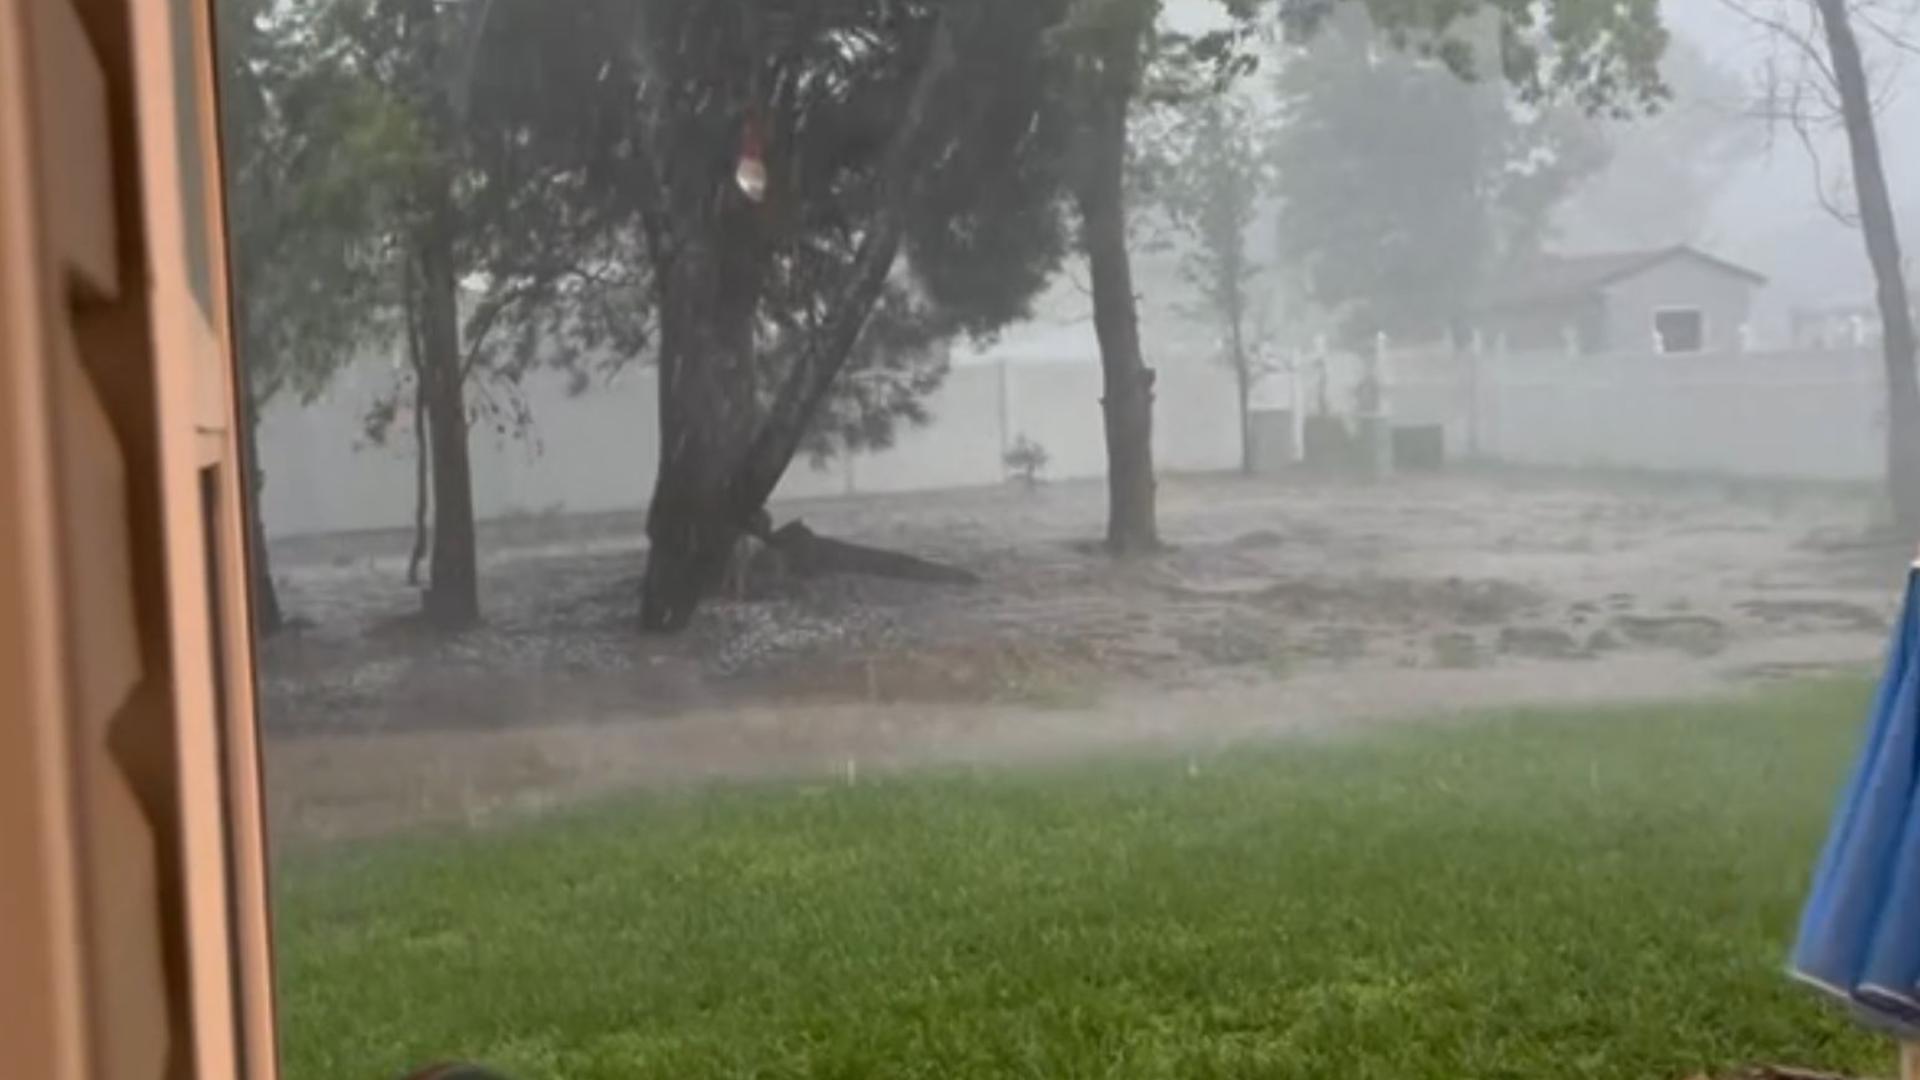 Hail hit the Sullivan, Missouri, area on Wednesday. Video captured by a 5 On Your Side viewer shows the downpour of hail as severe weather swept through the area.